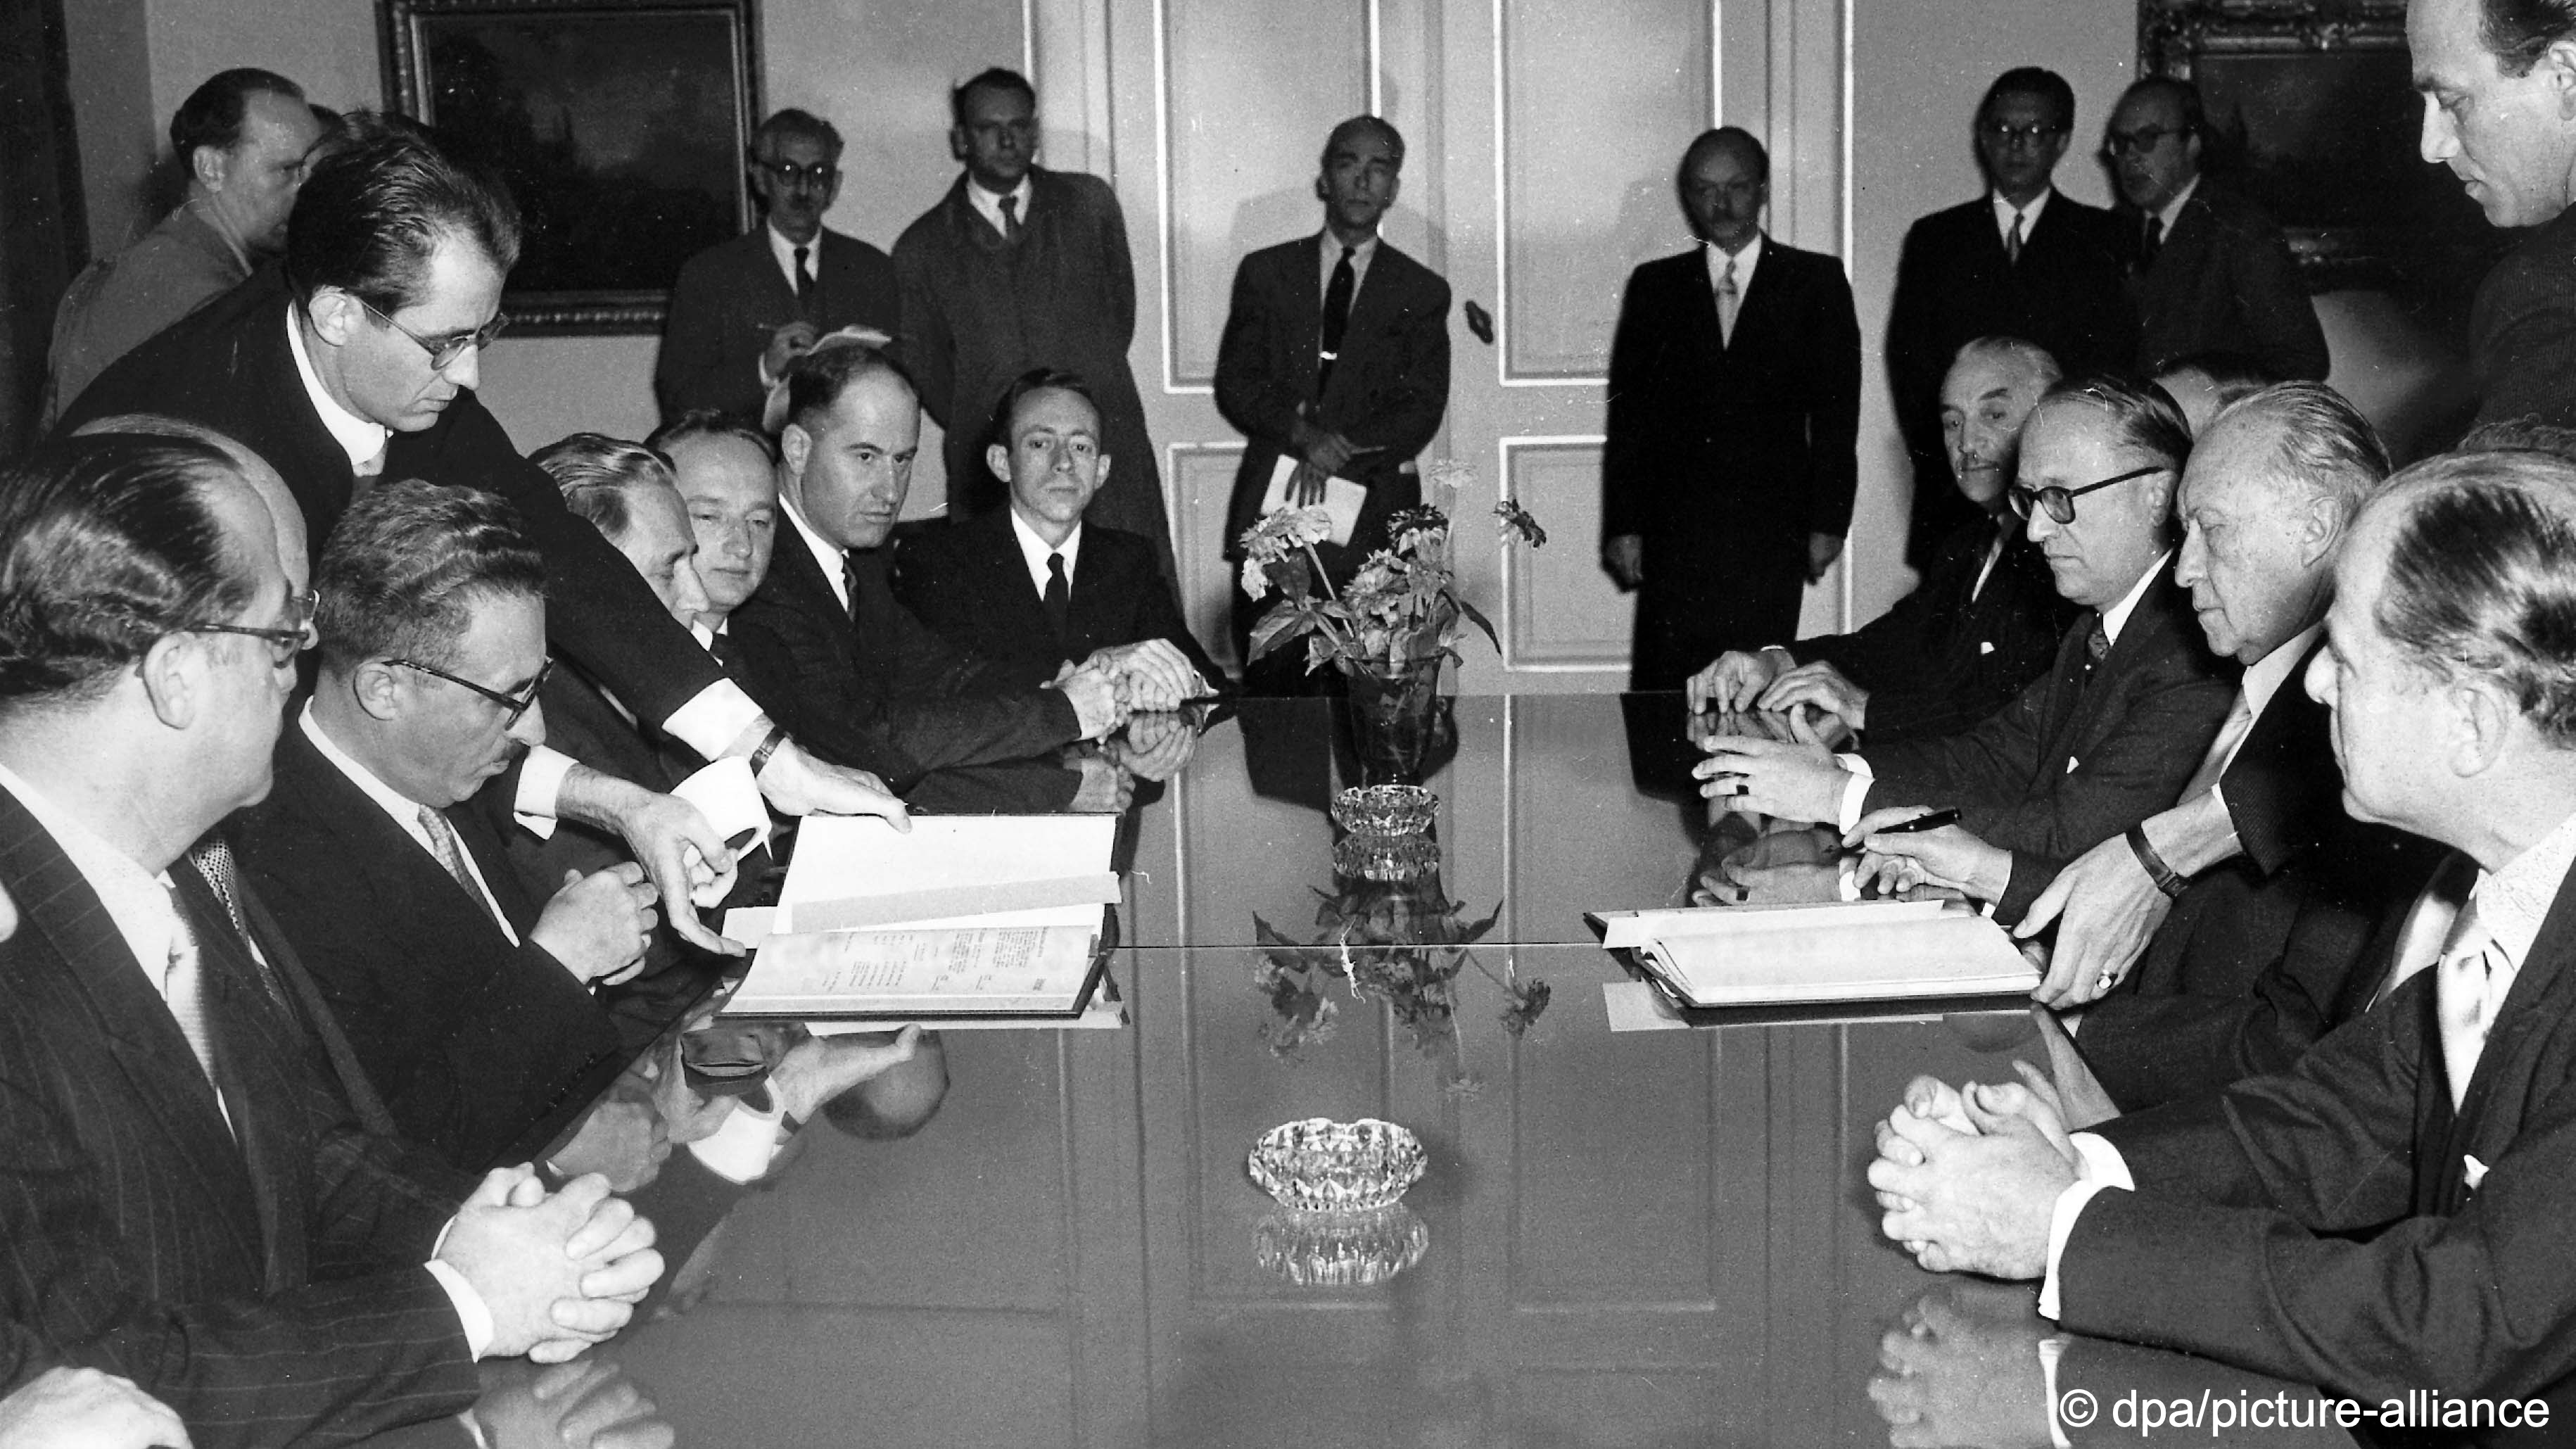 Members of the Israeli (left) and German delegations at the signing of the Luxembourg Agreement, Luxembourg, 10 September 1952